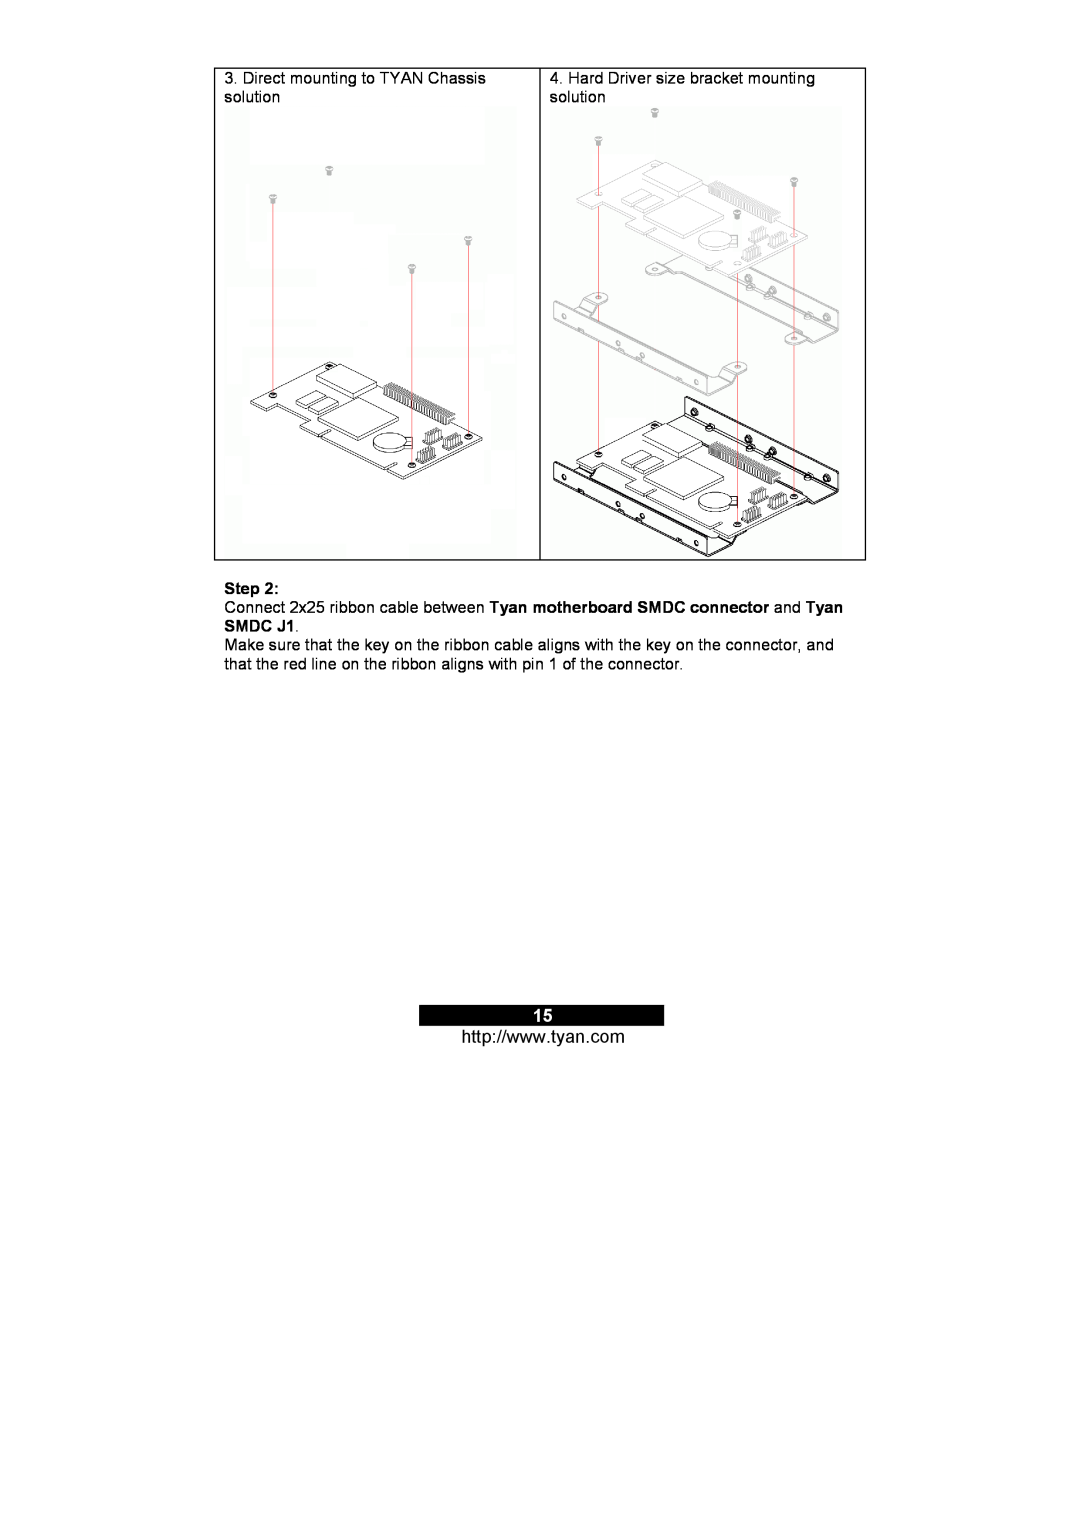 Tyan Computer M3291, M3295 Direct mounting to TYAN Chassis solution, Hard Driver size bracket mounting solution, Step 